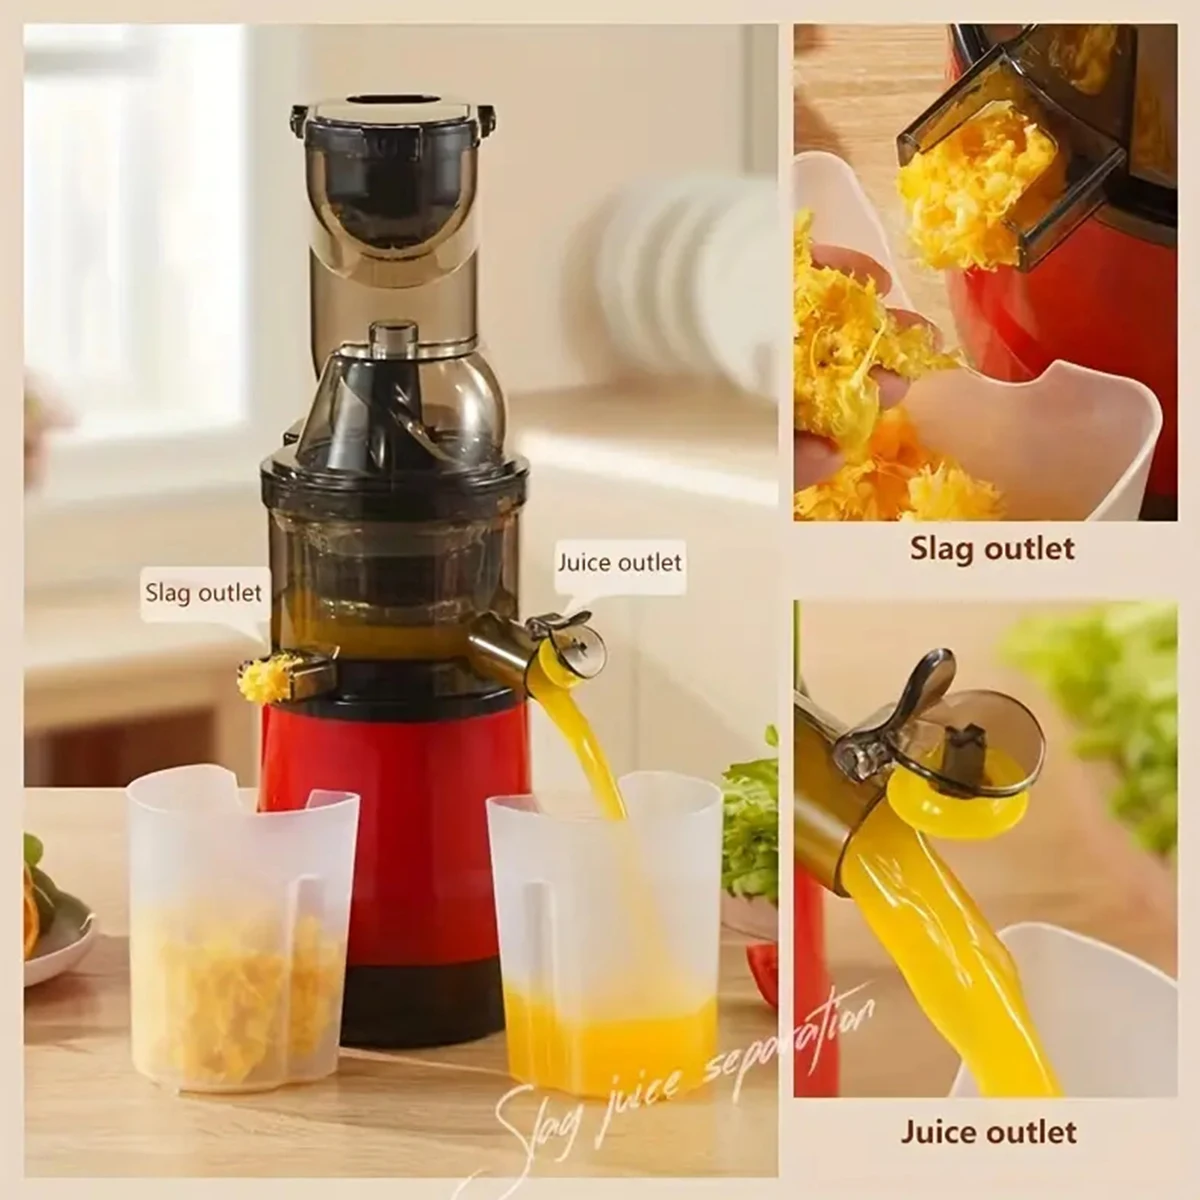 https://ae01.alicdn.com/kf/S5f7a5b69521544a384115819e0739a86O/Cold-Press-Juicer-Machines-Big-Mouth-Opening-Whole-Slow-Masticating-Juicer-Easy-Clean-Juice-Extractor-Maker.jpg